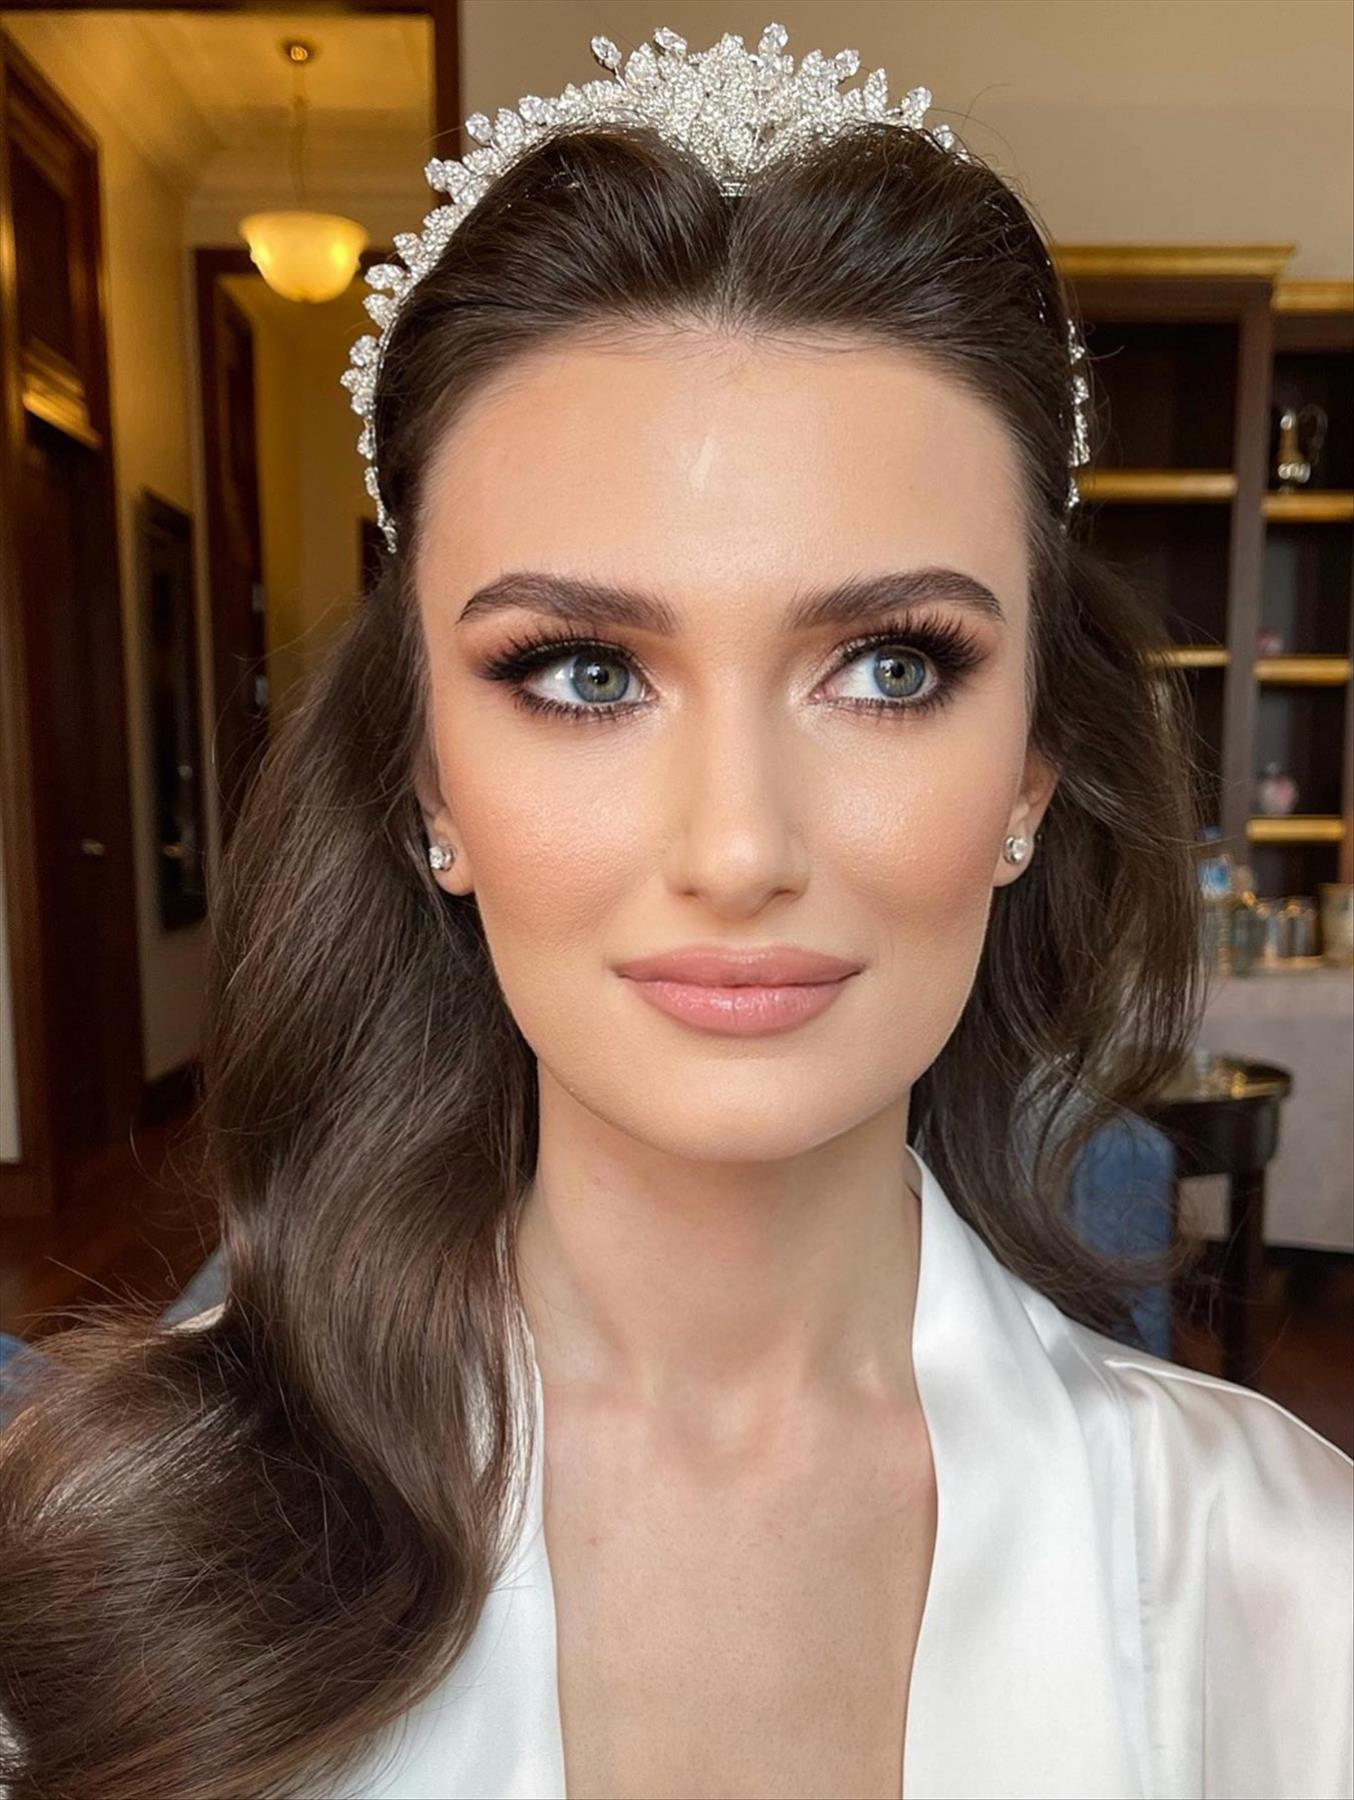 Stunning bridal makeup looks to brighten your Big Day